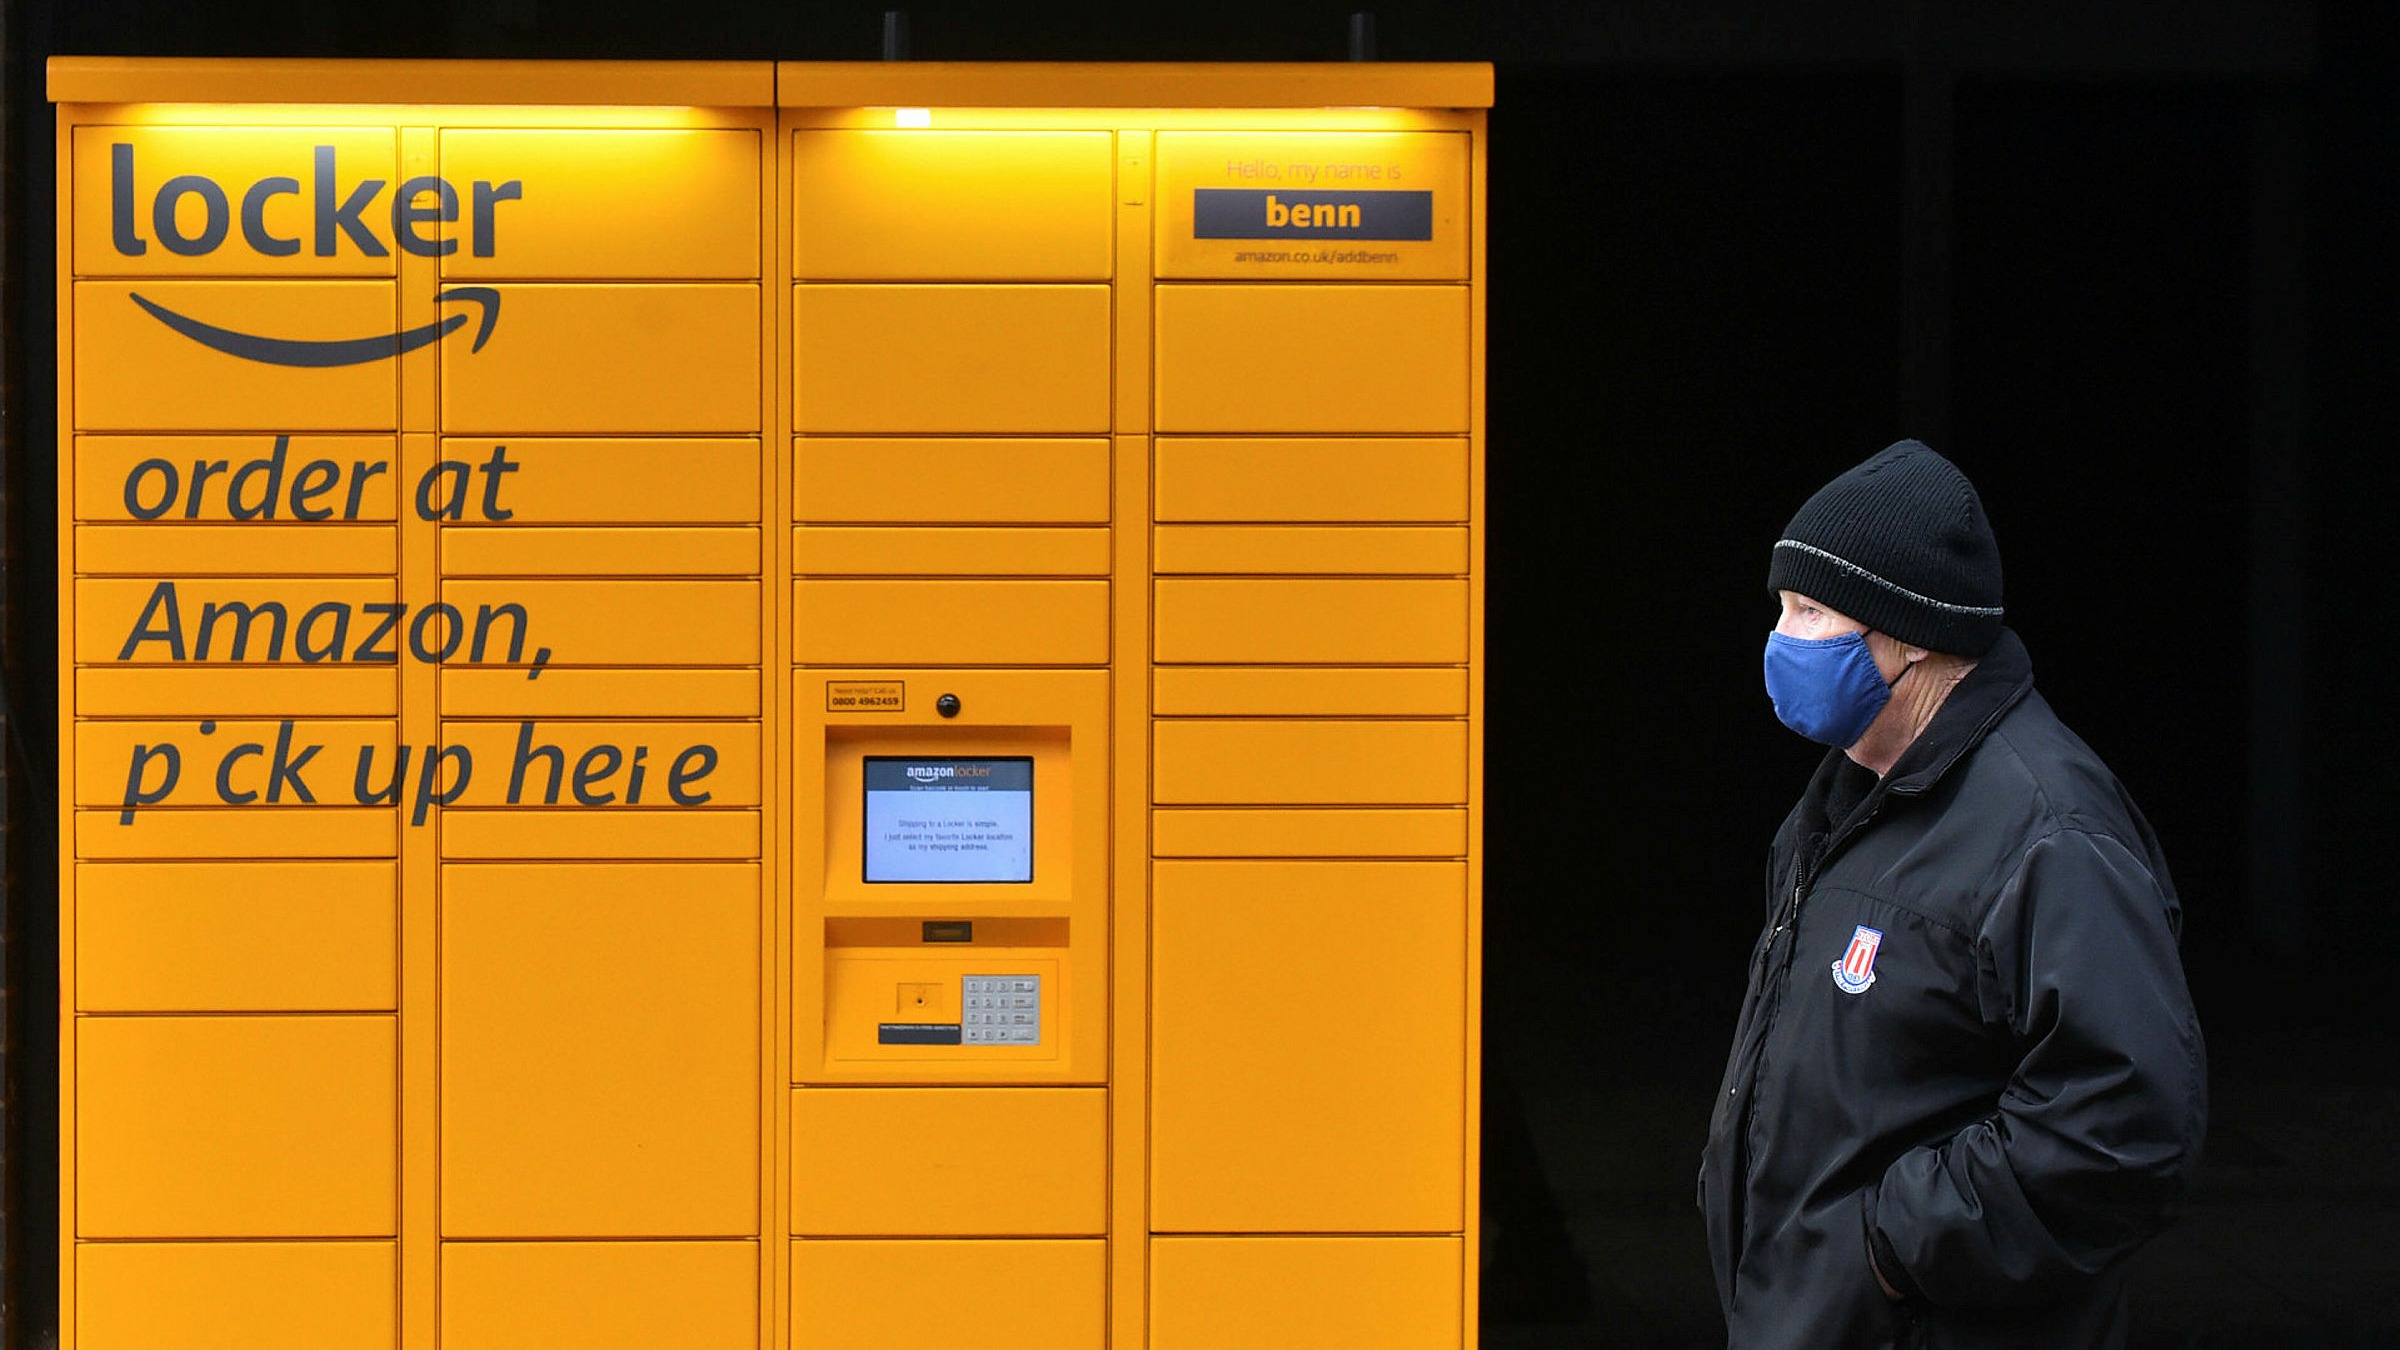 French La Poste rolls out Collect & Station lockers nationwide